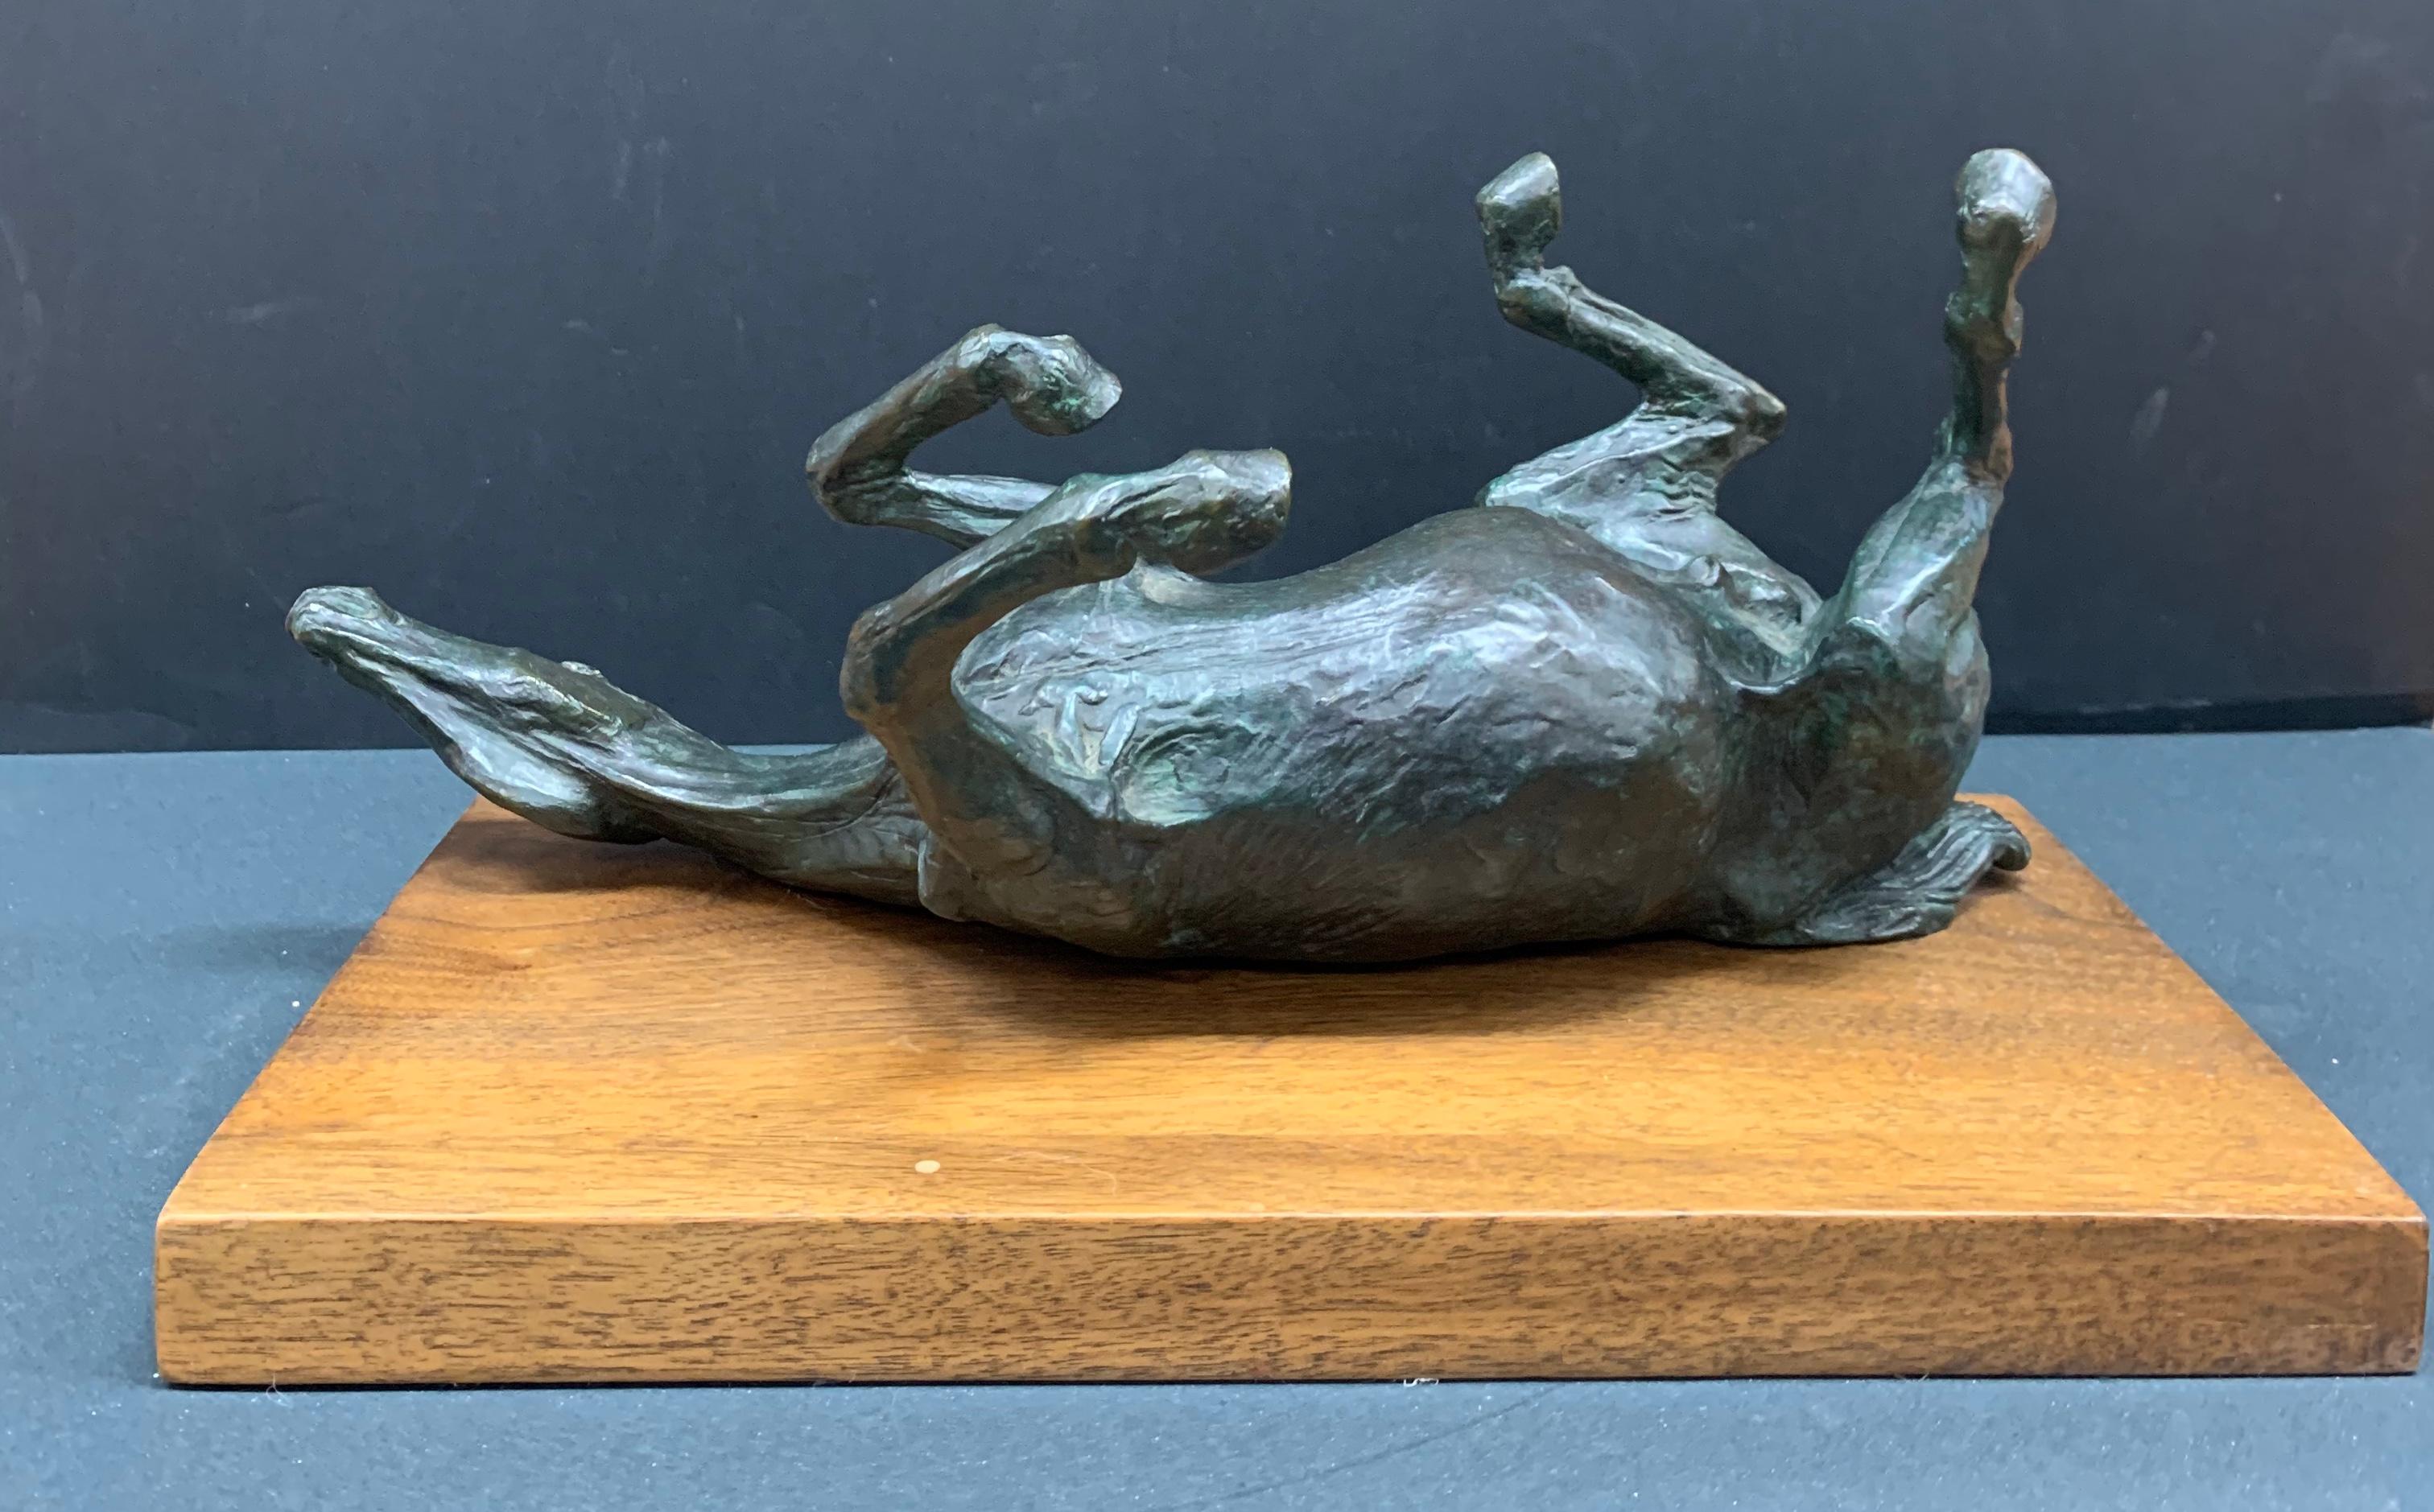 Dmitri Tougarinov
1990
3/9 from the edition of 9
Bronze sculpture 
Signed in bronzed
16 x 6 x 5 inches